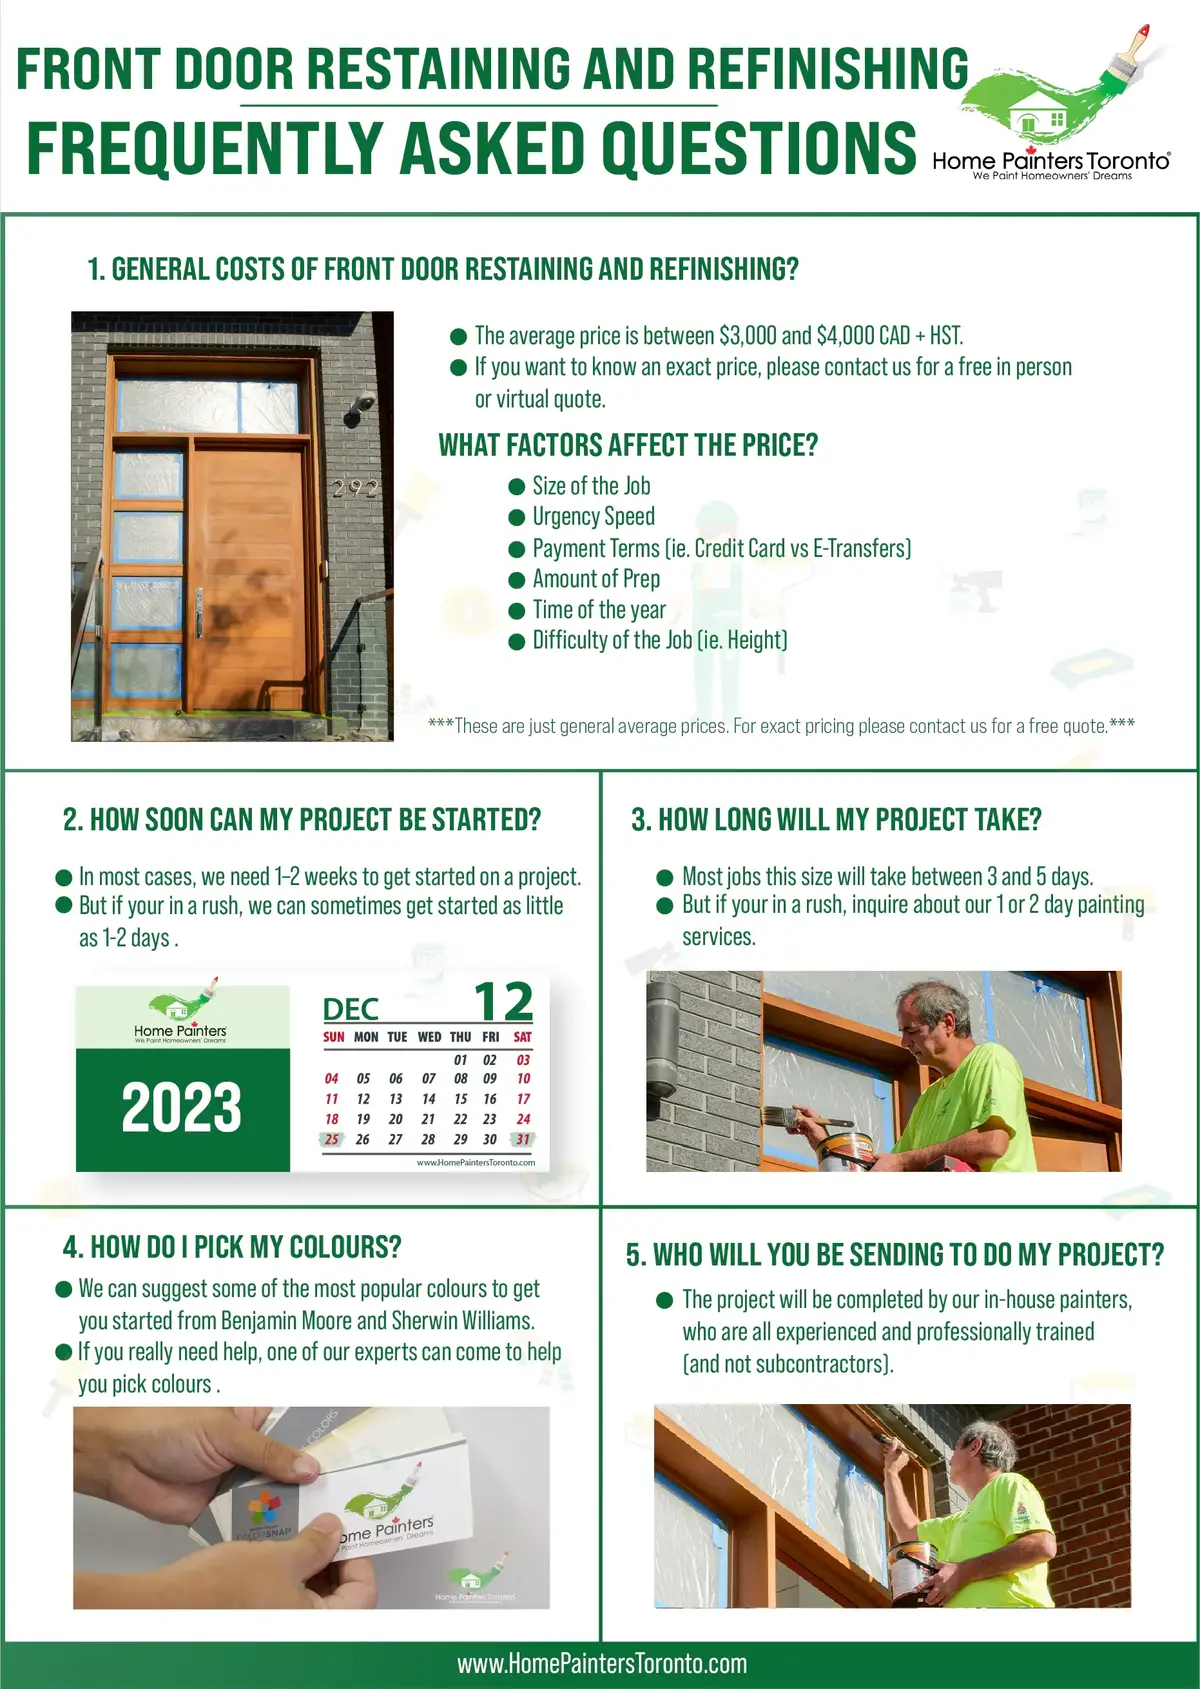 Front Door Restaining and Refurnishing Infographic